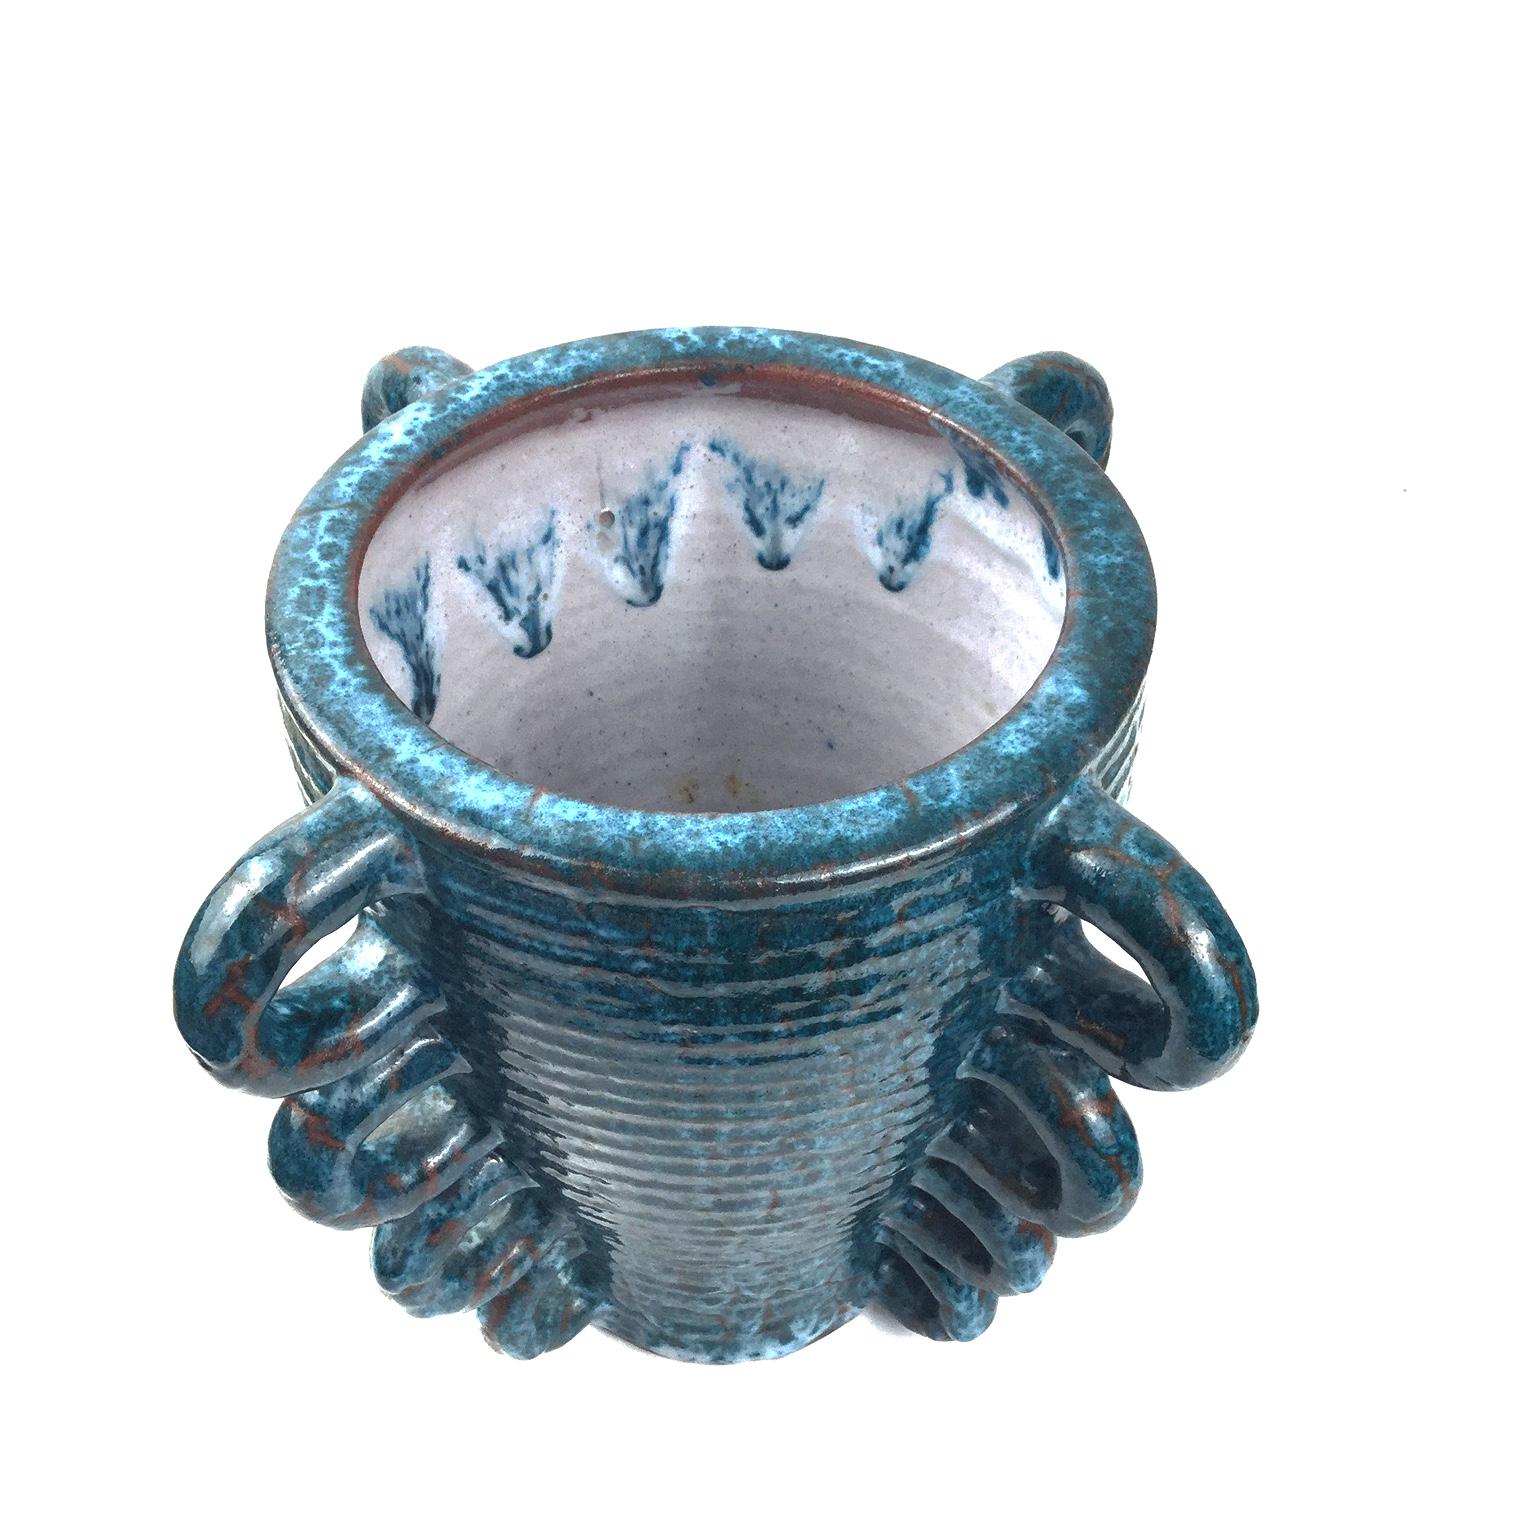 Terracotta and turquoise glazed vase from the pottery manufacturer Accolay France
Uncommon interesting shape with multiples handles.